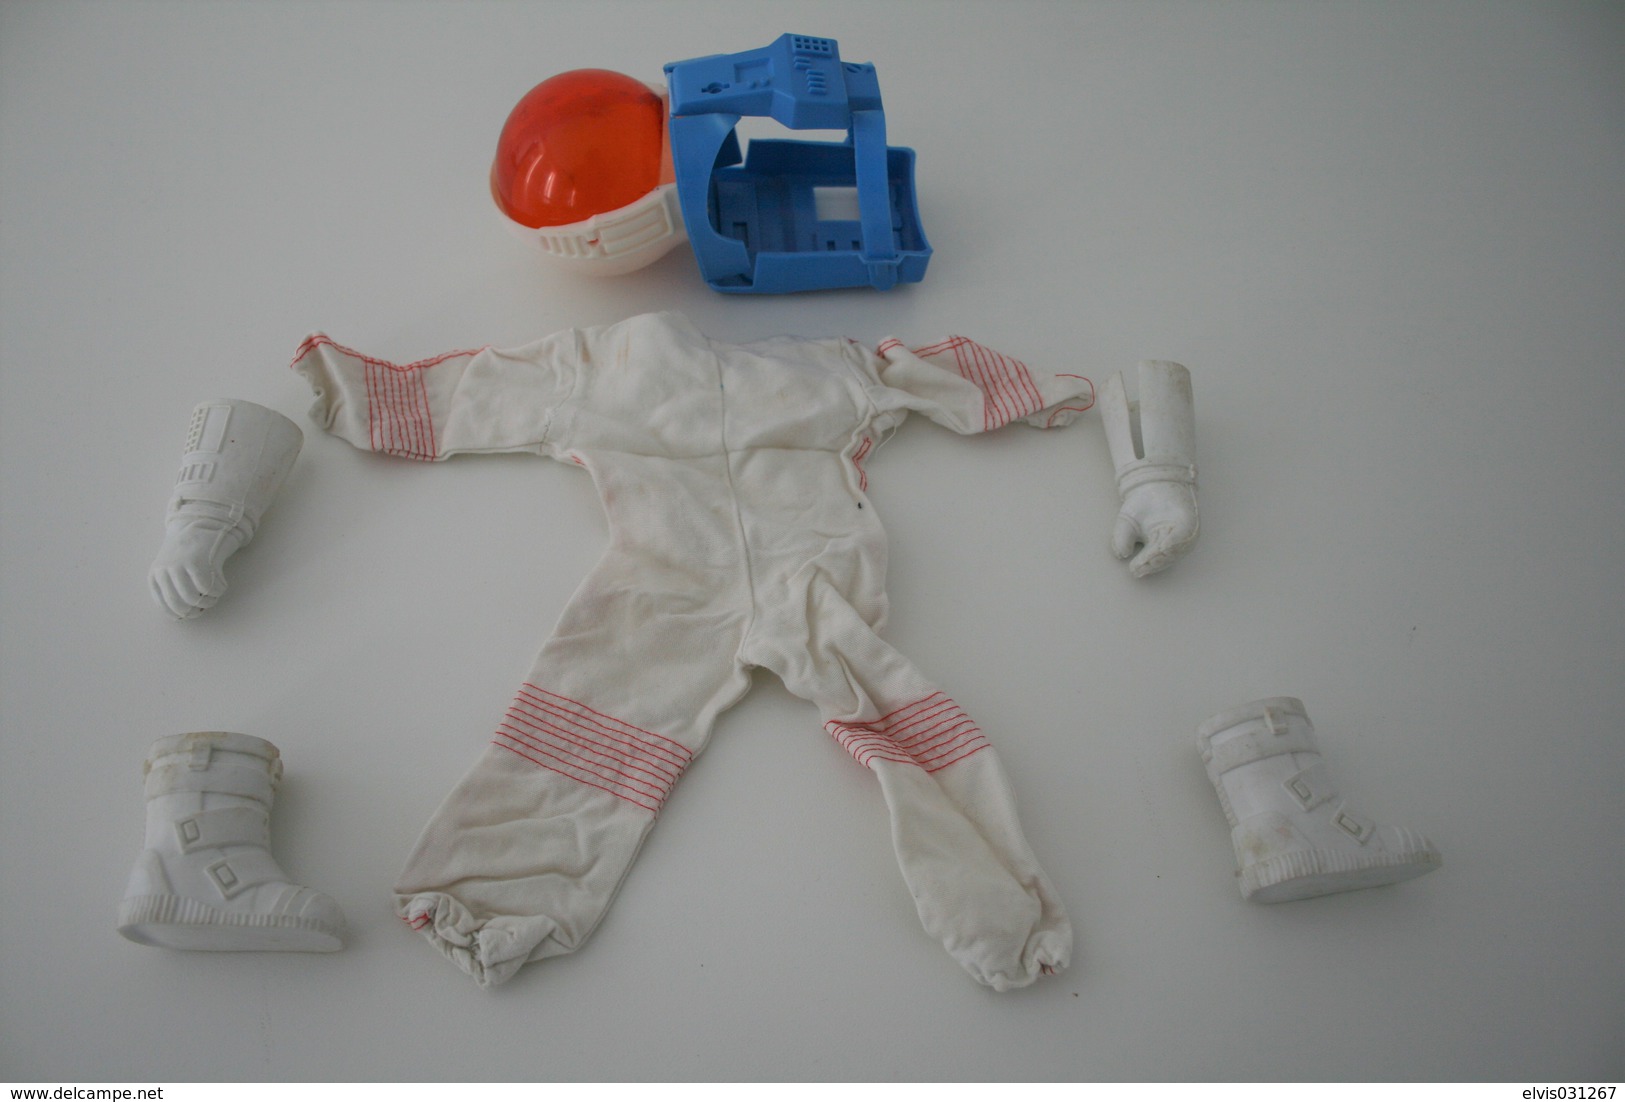 Vintage KENNER - SIX MILLION DOLLAR MAN PARTS : MISSION TO MARS SPACESUIT - FIGURE NOT INCL - Kenner 1973 - Action Man - - Action Man